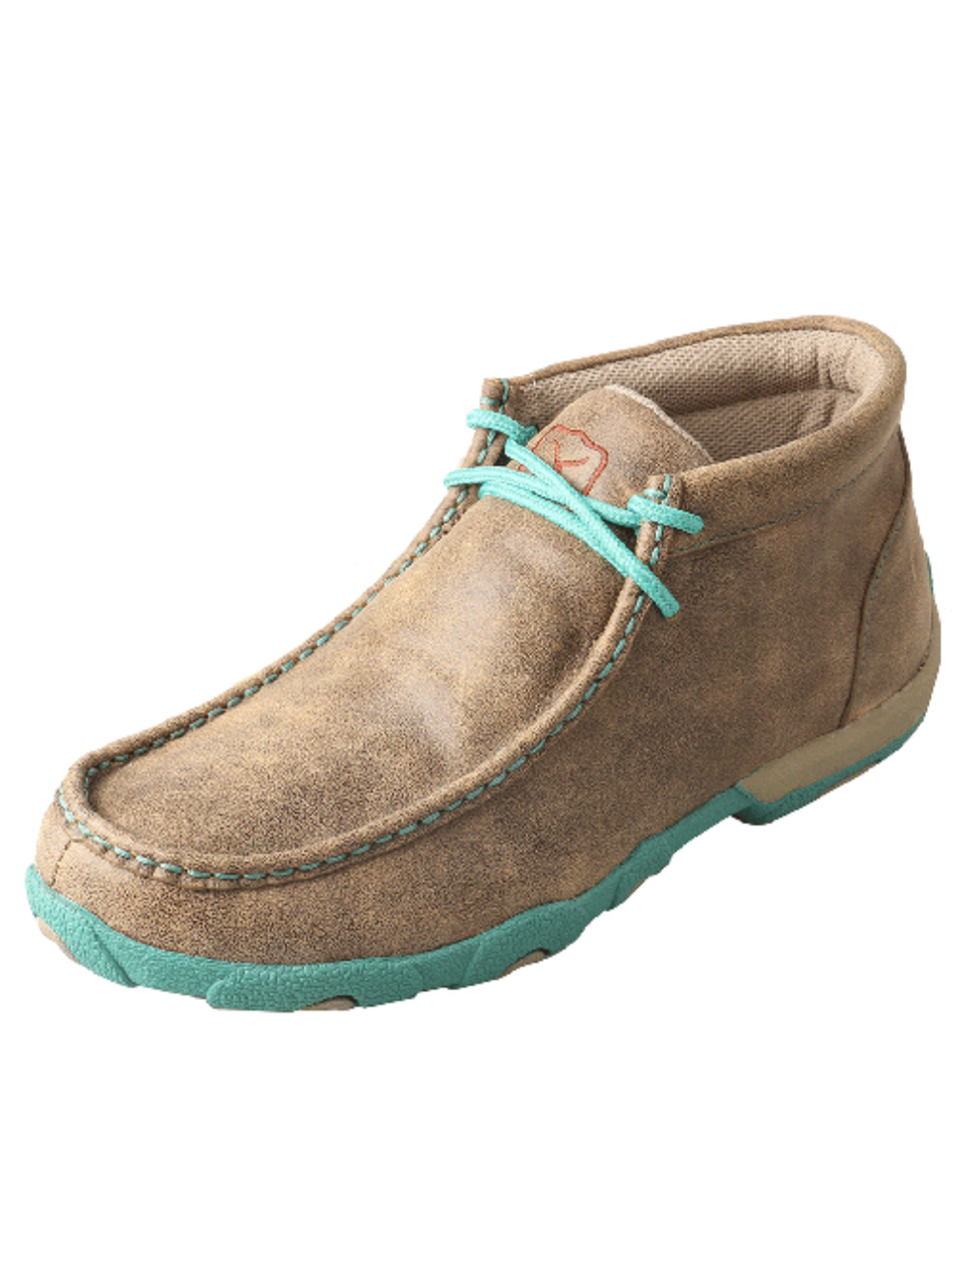 twisted x boots moccasins